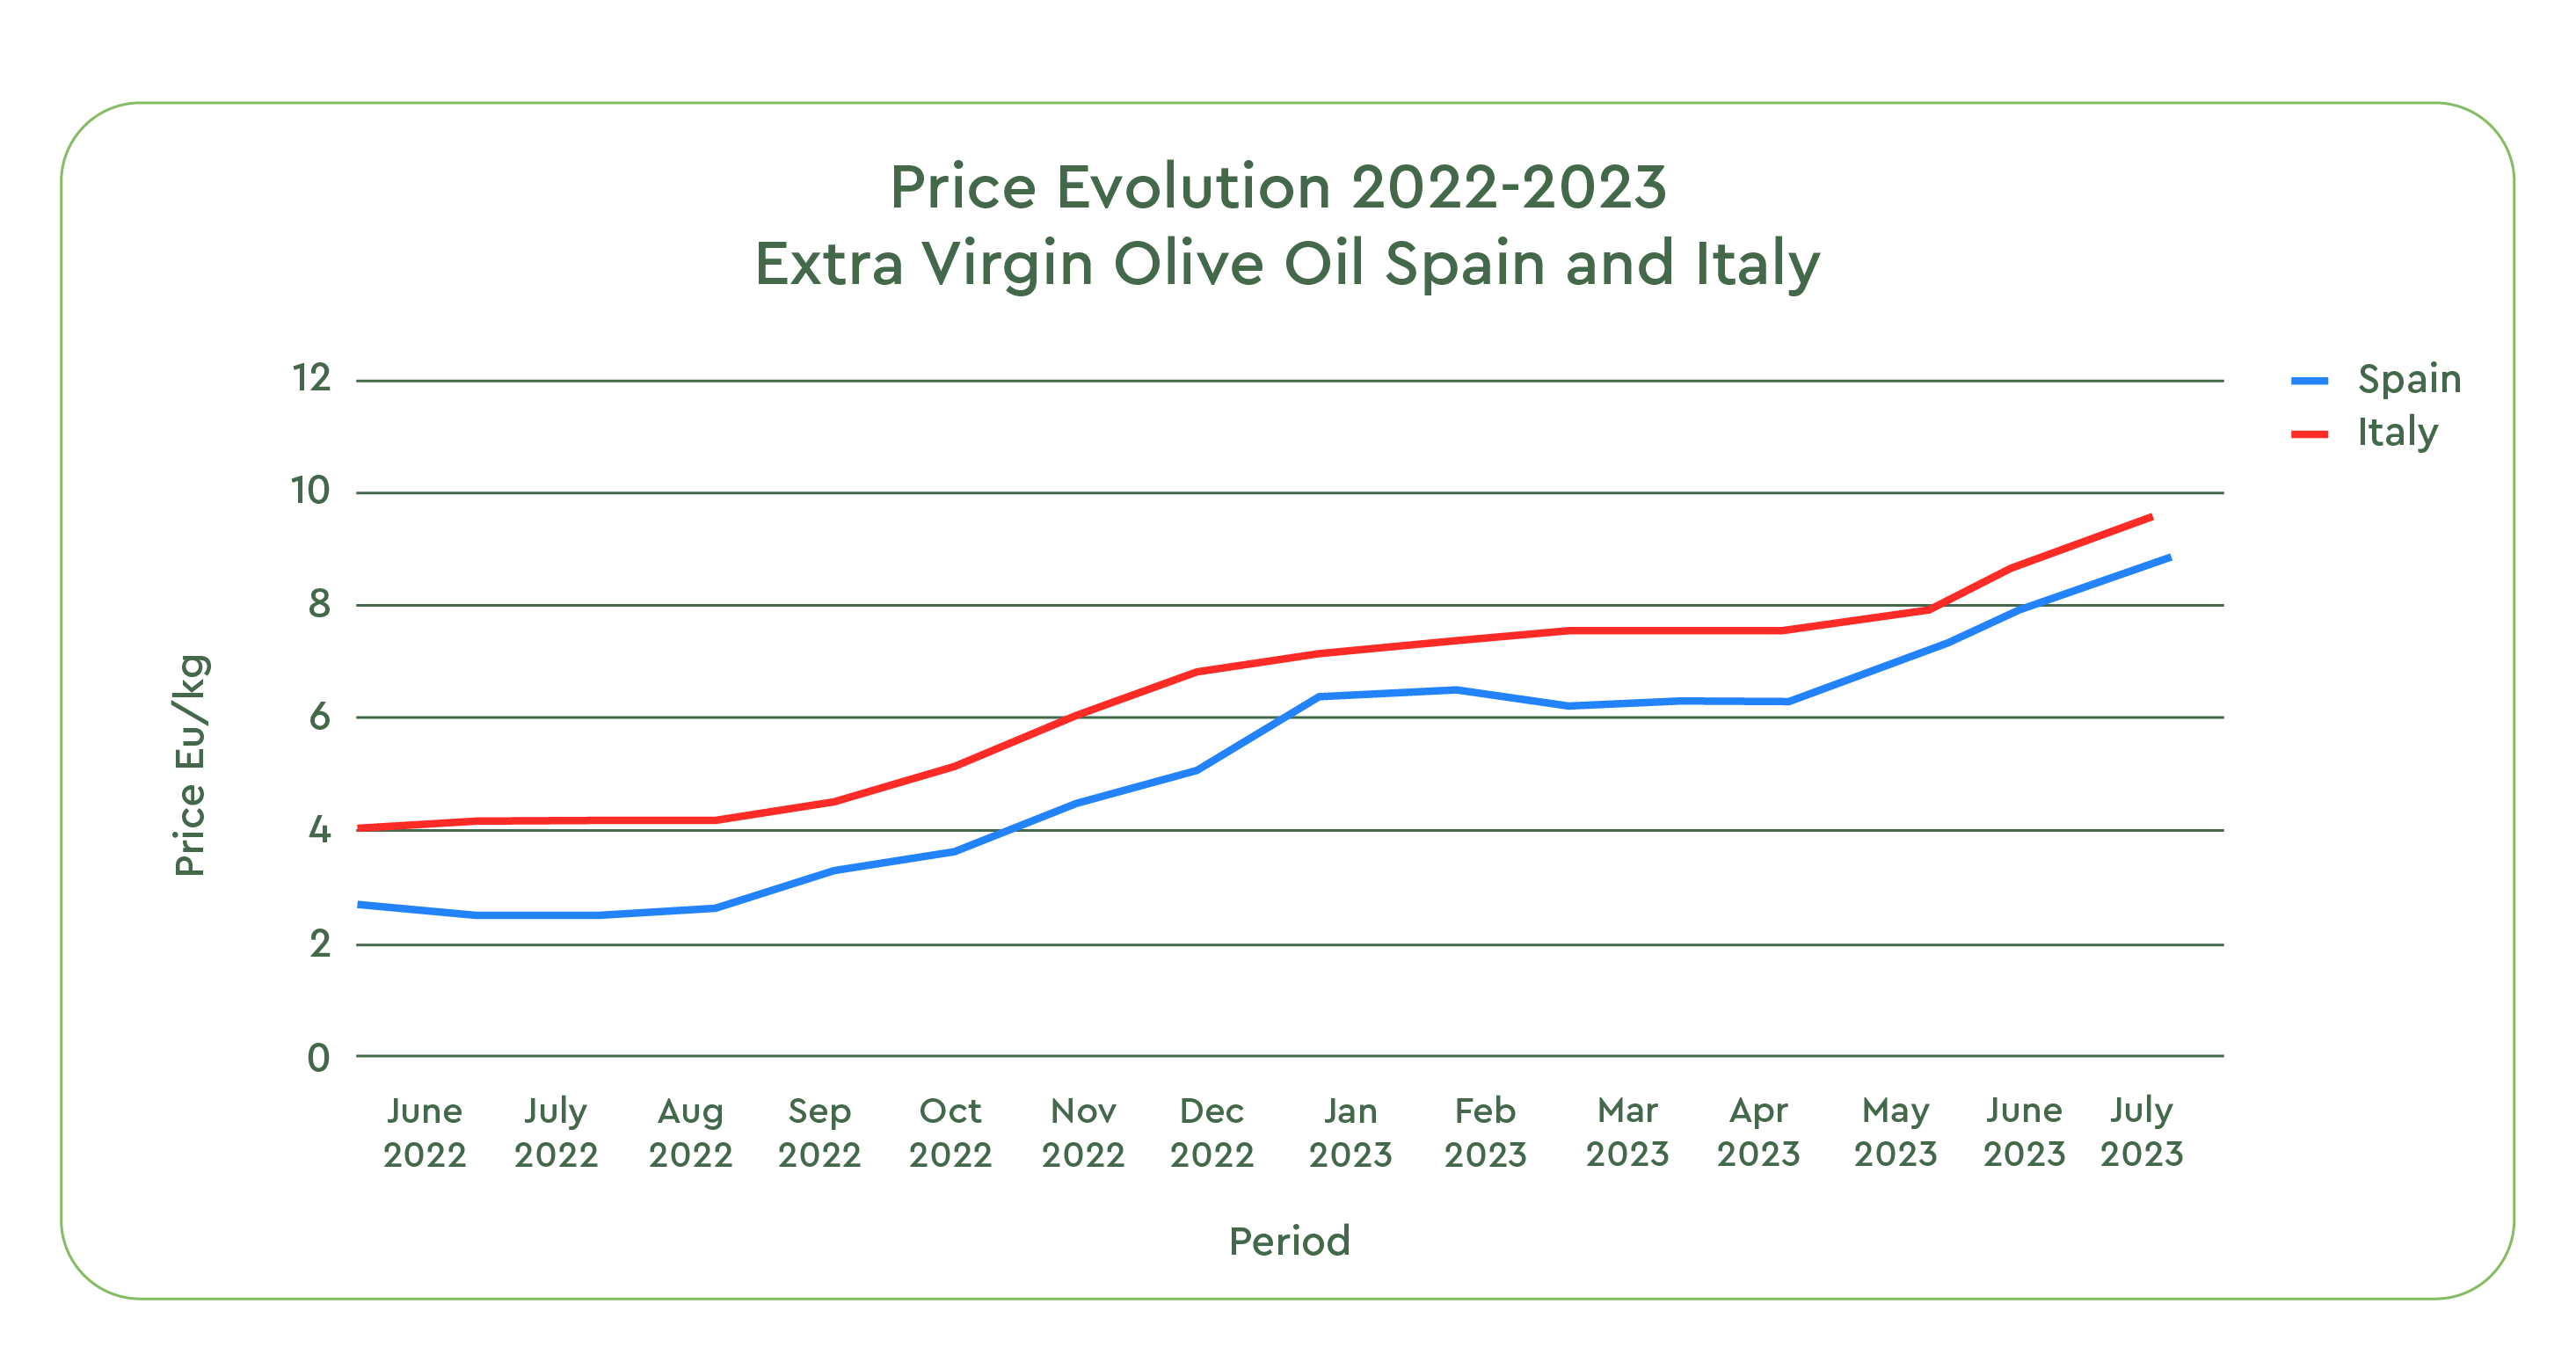 Price evolution - Spain and Italy